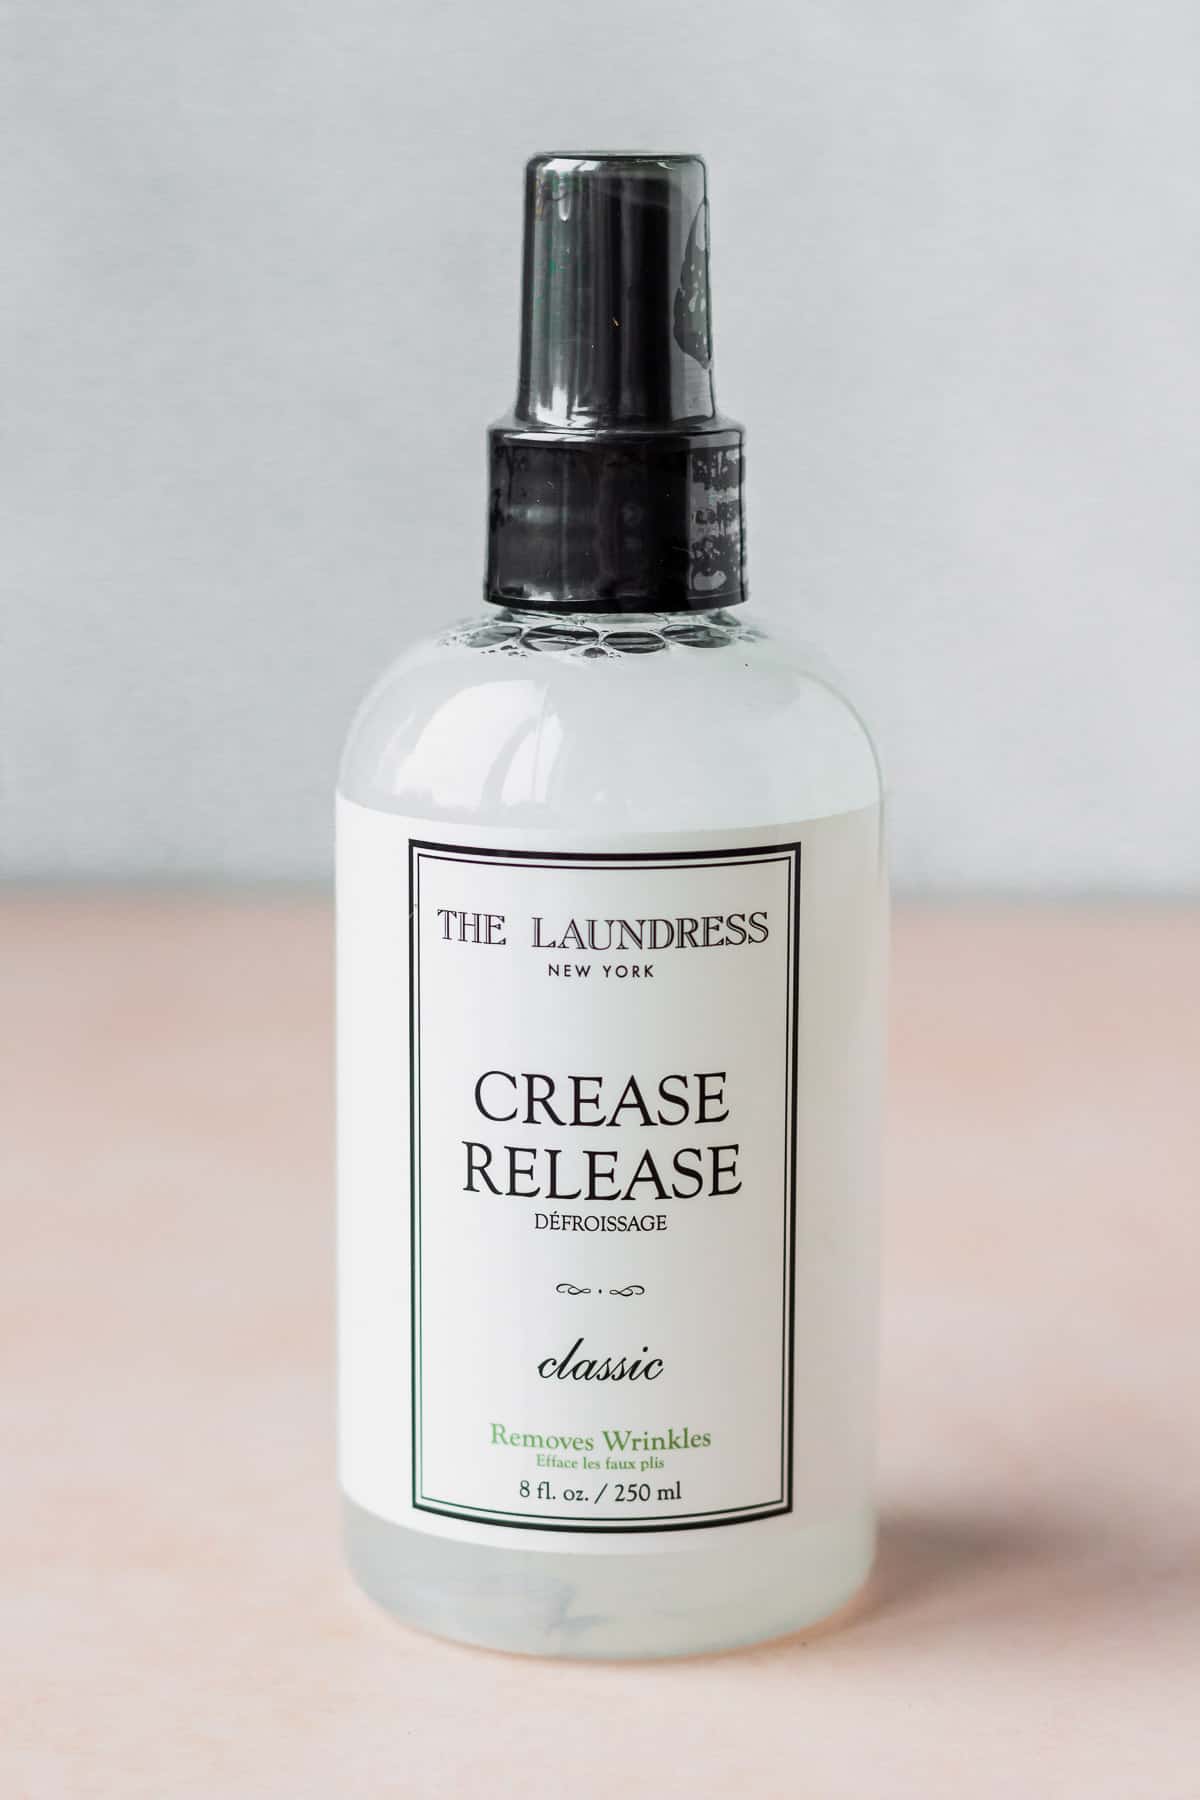 A bottle of The Laundress Crease Release